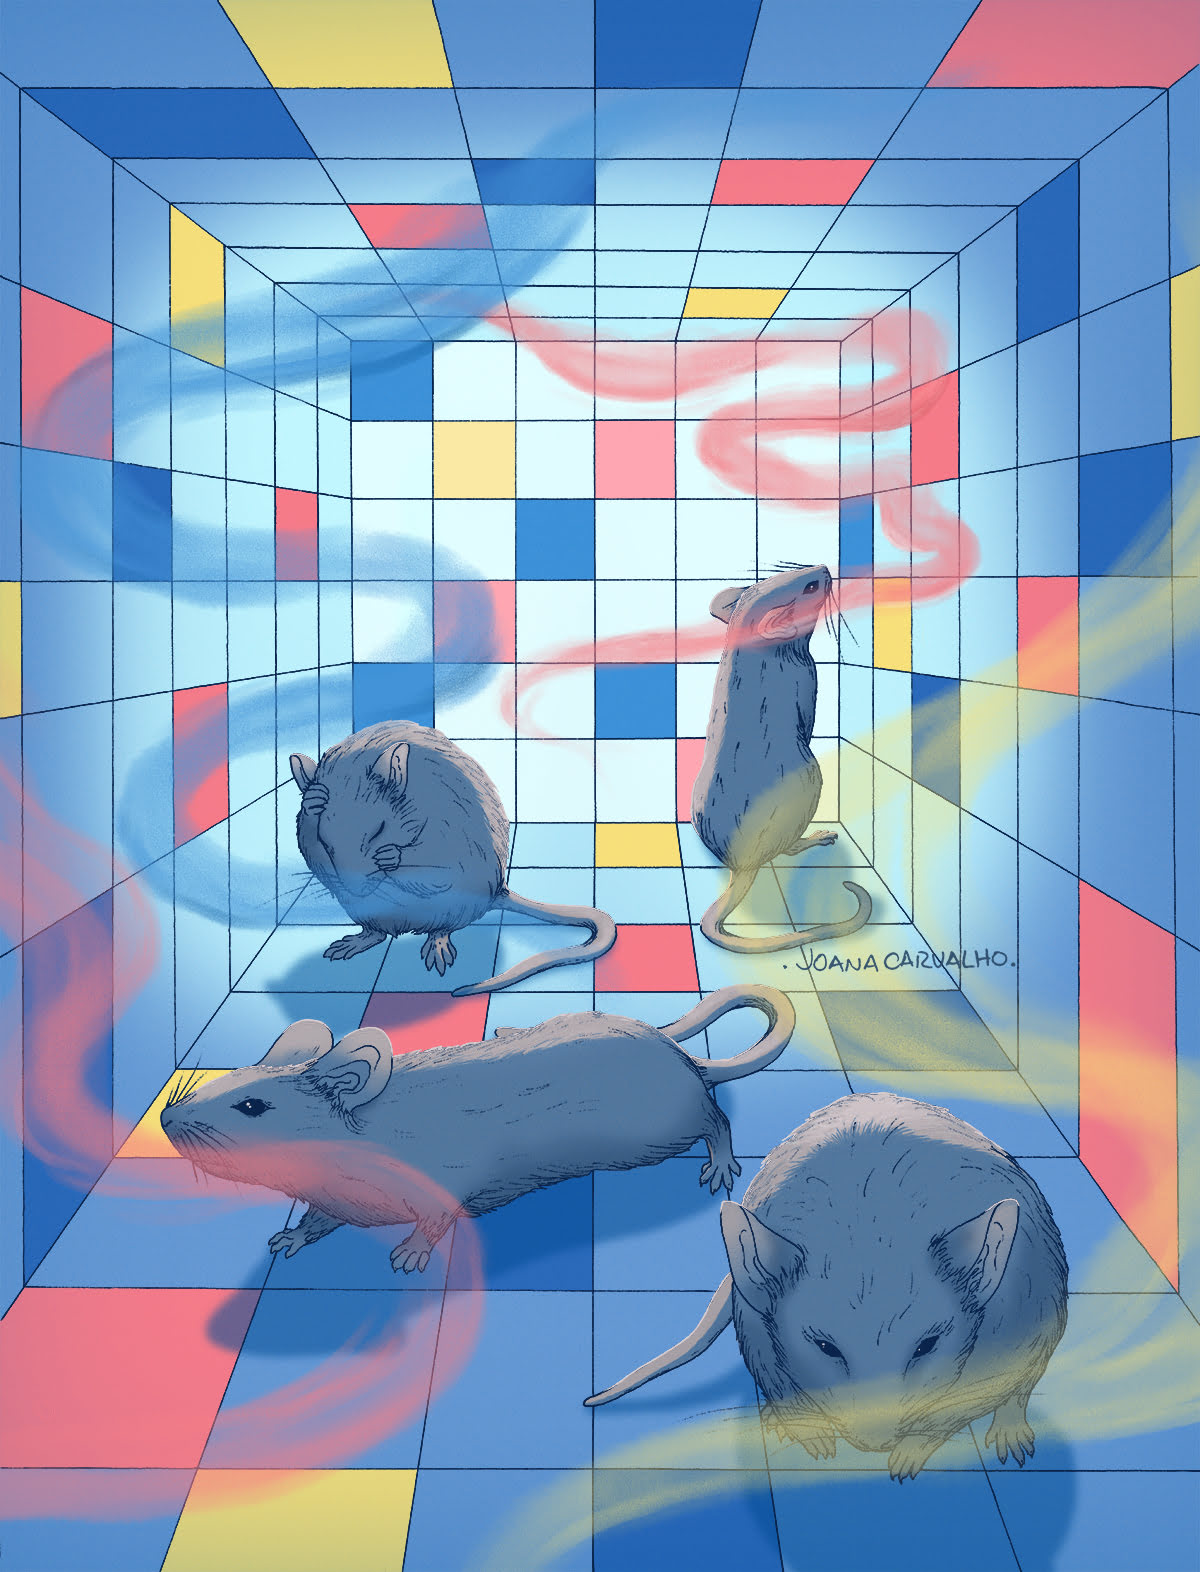 An illustration of four rats in an enclosed space, tiled with coloured squares